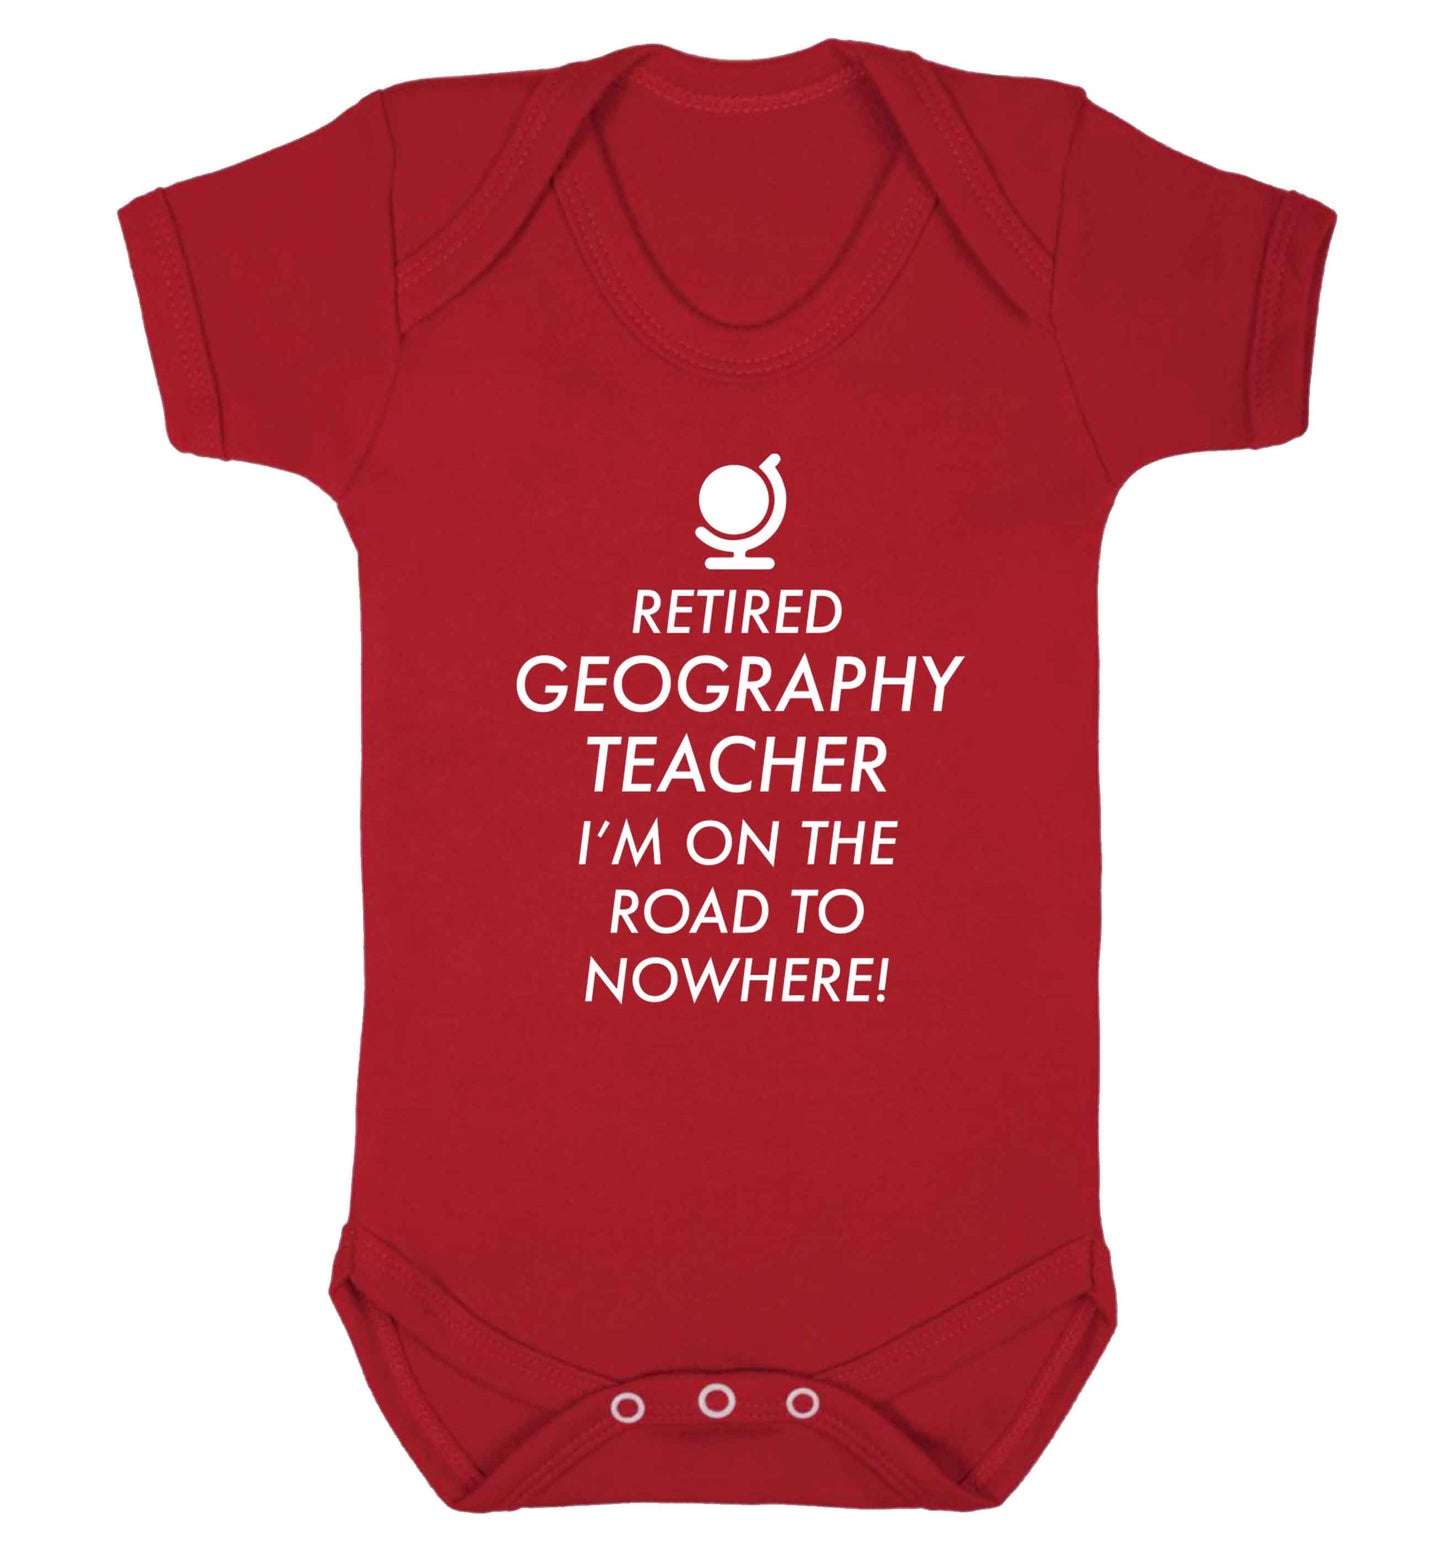 Retired geography teacher I'm on the road to nowhere Baby Vest red 18-24 months